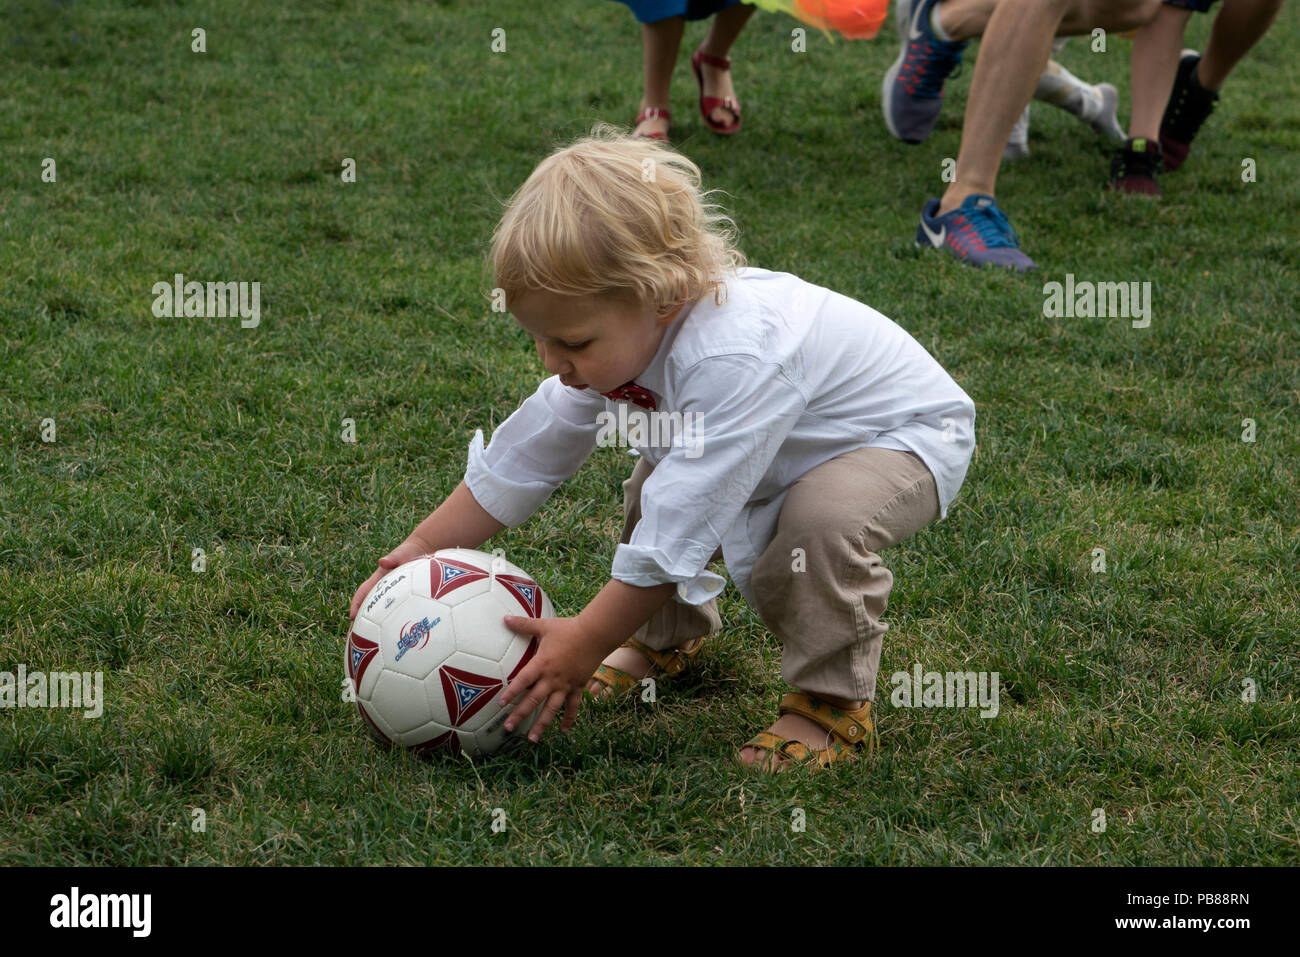 A boy picking up a soccer ball during the Swedish Midsummer Festival in Battery Park City. Stock Photo